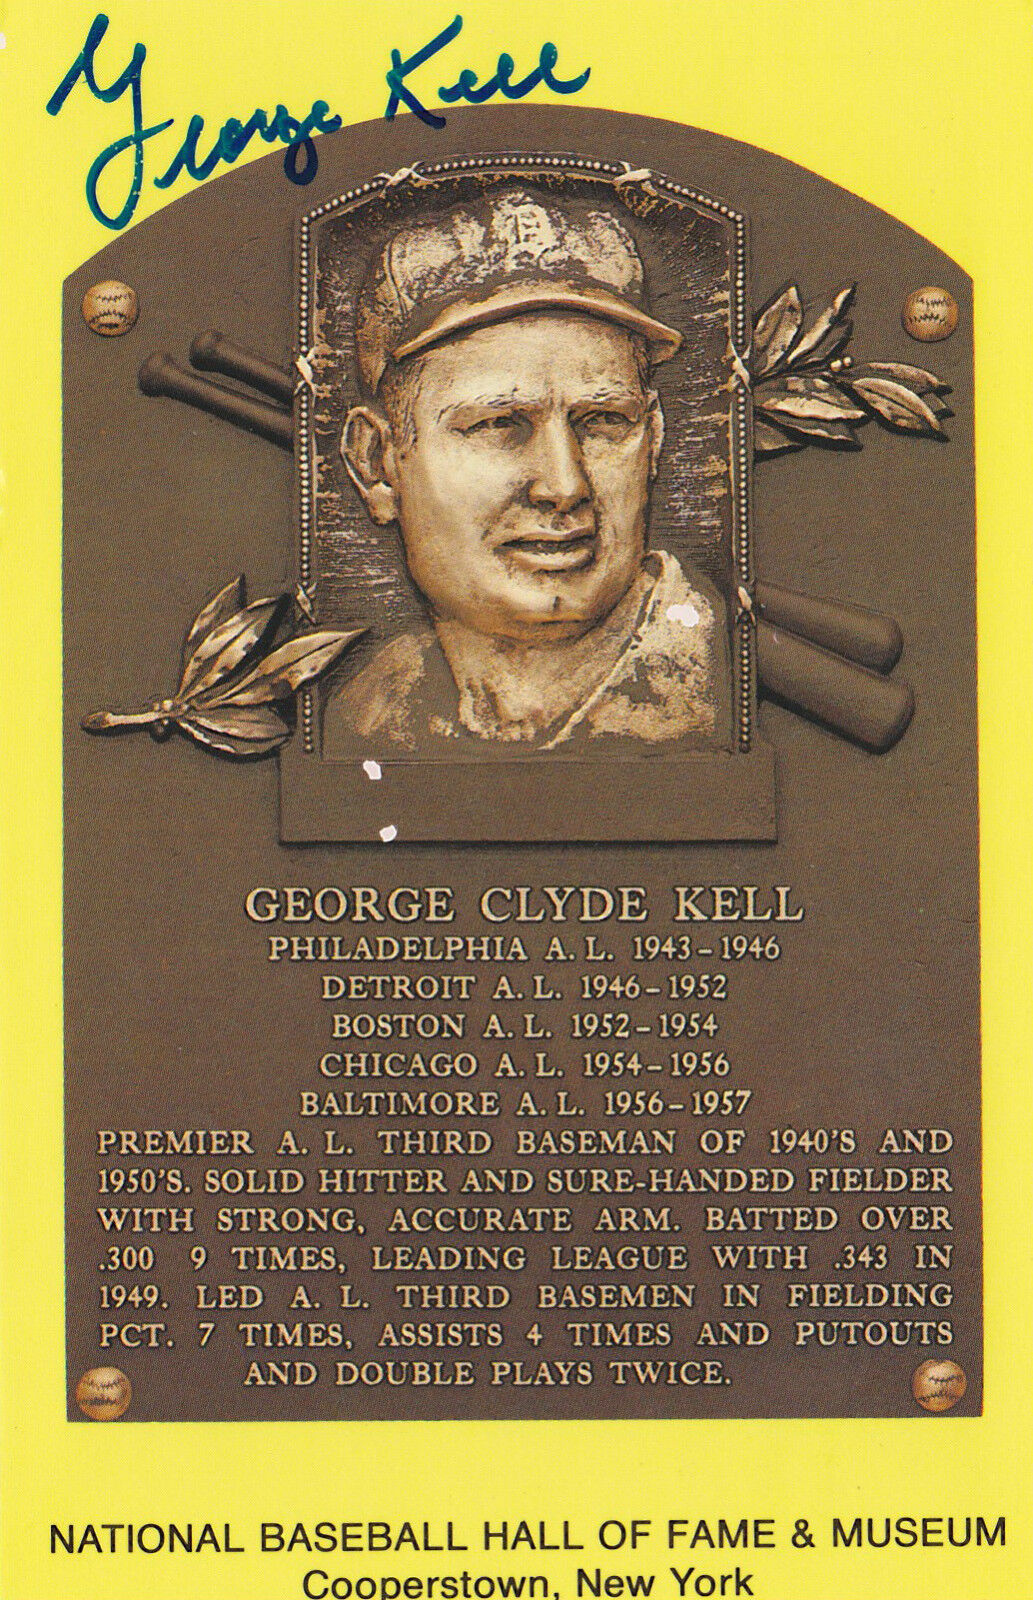 GEORGE KELL SIGNED BASEBALL HALL OF FAME PLAQUE CARD TIGERS A\'s SOX HOF JSA AUTO